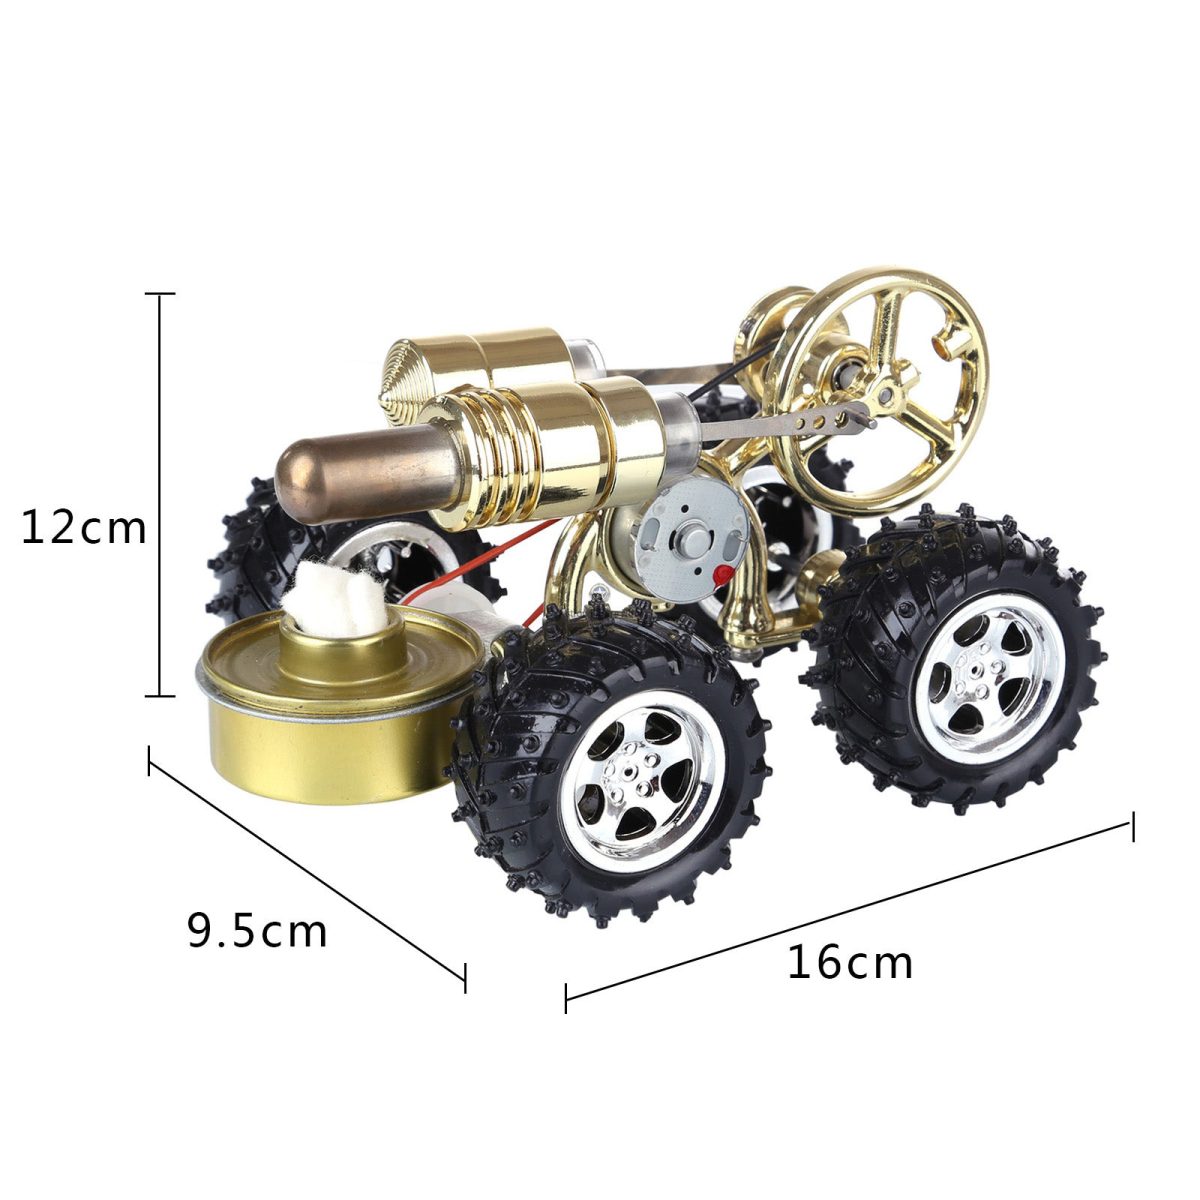 Stirling Engine Model - Science and Educational Science Experiment Car Model